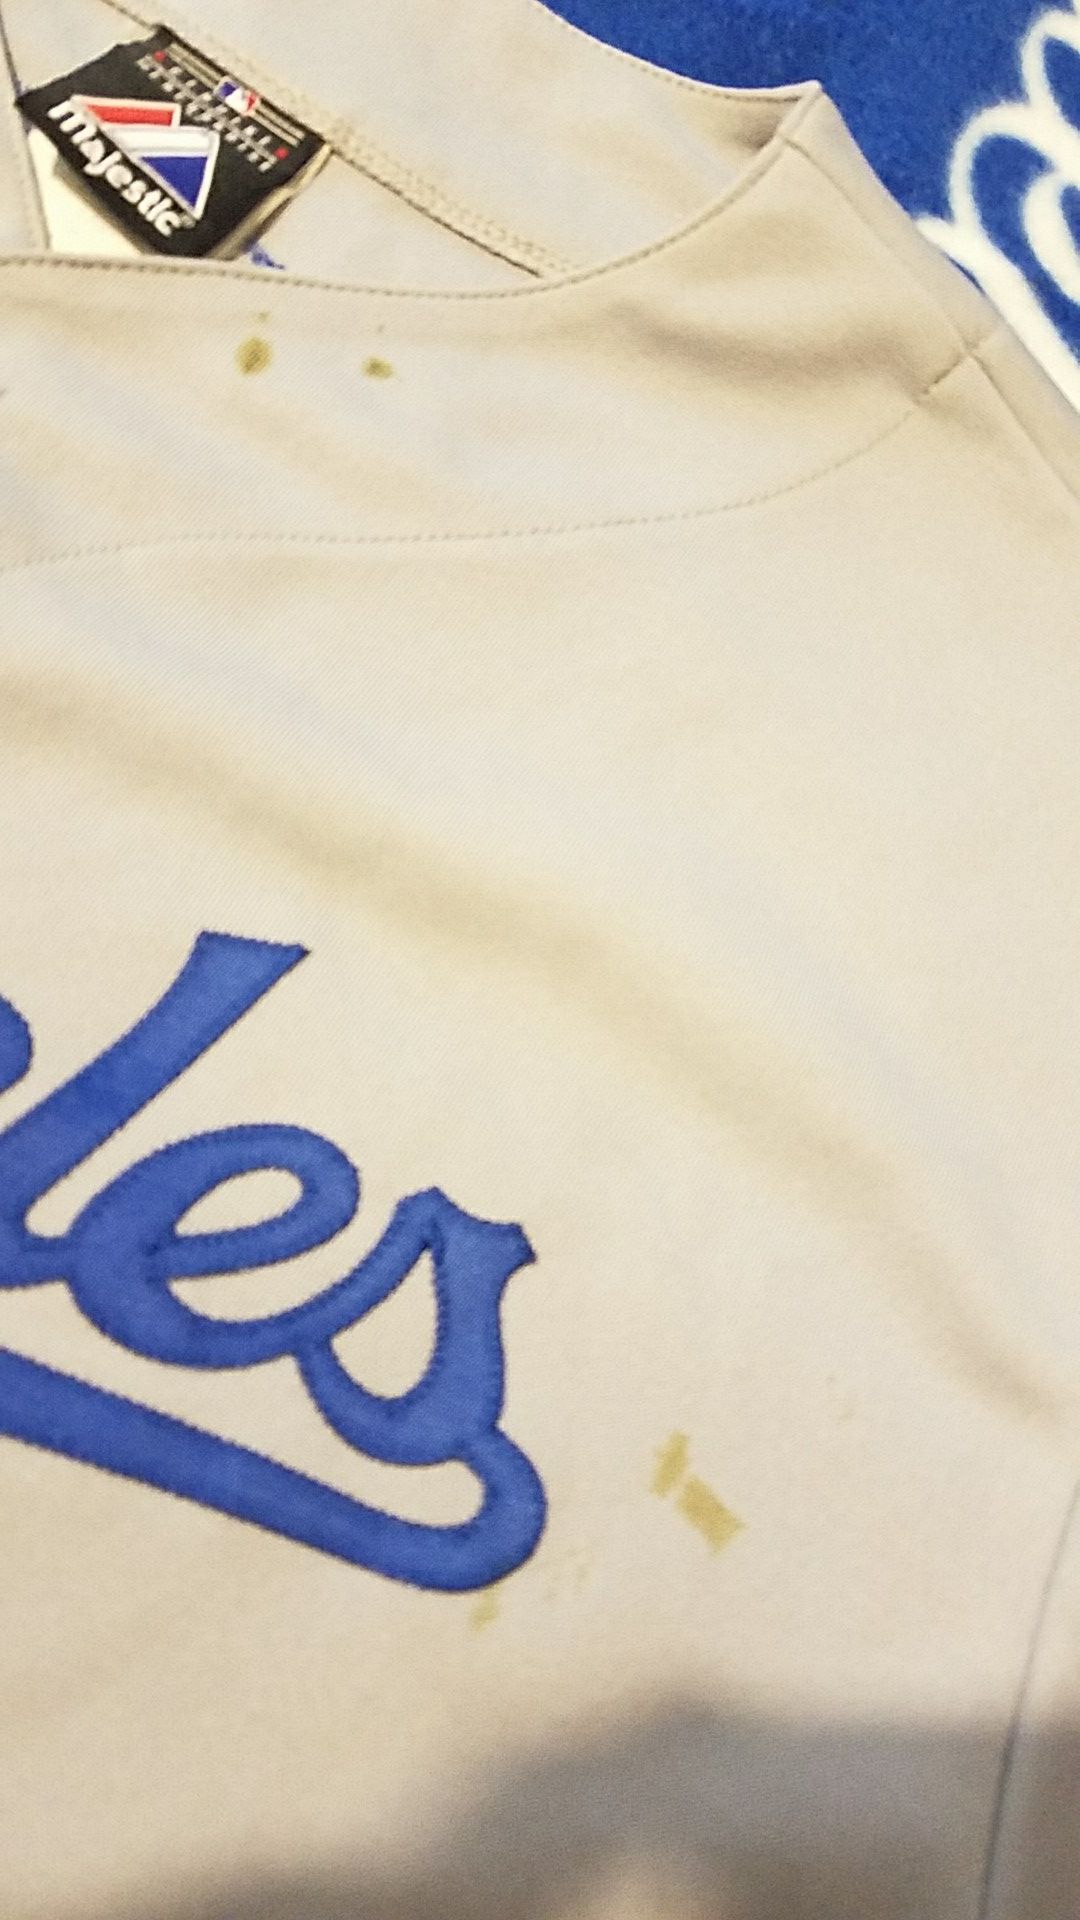 DODGERS KERSHAW Jersey for Sale in Downey, CA - OfferUp